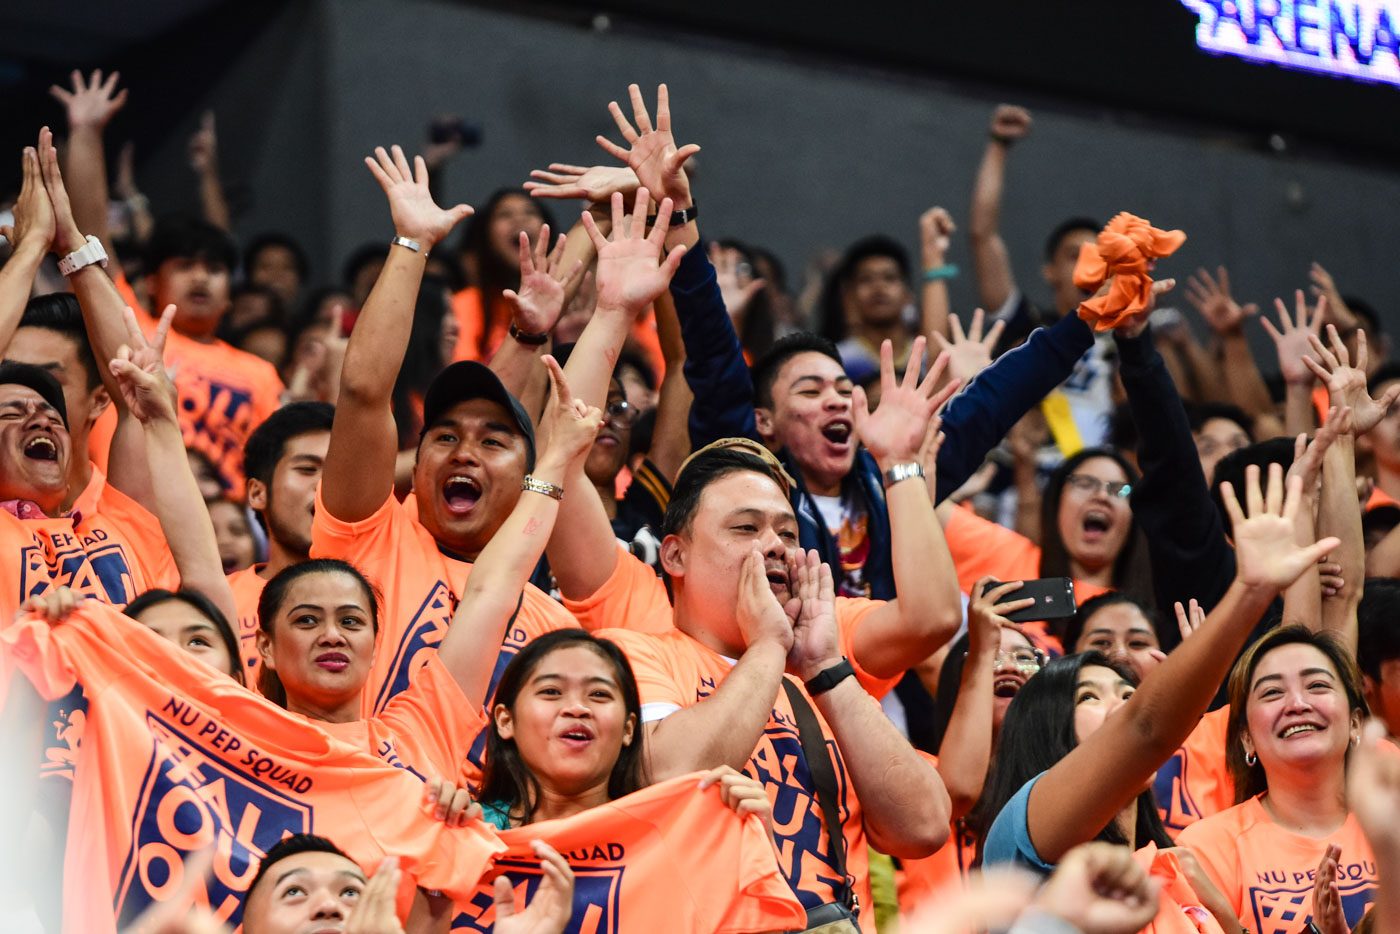 ECSTATIC. The NU supporters came in orange shirts that stated "All Out on 5" to light up the MOA Arena. Photo by Alecs Ongcal/Rappler  